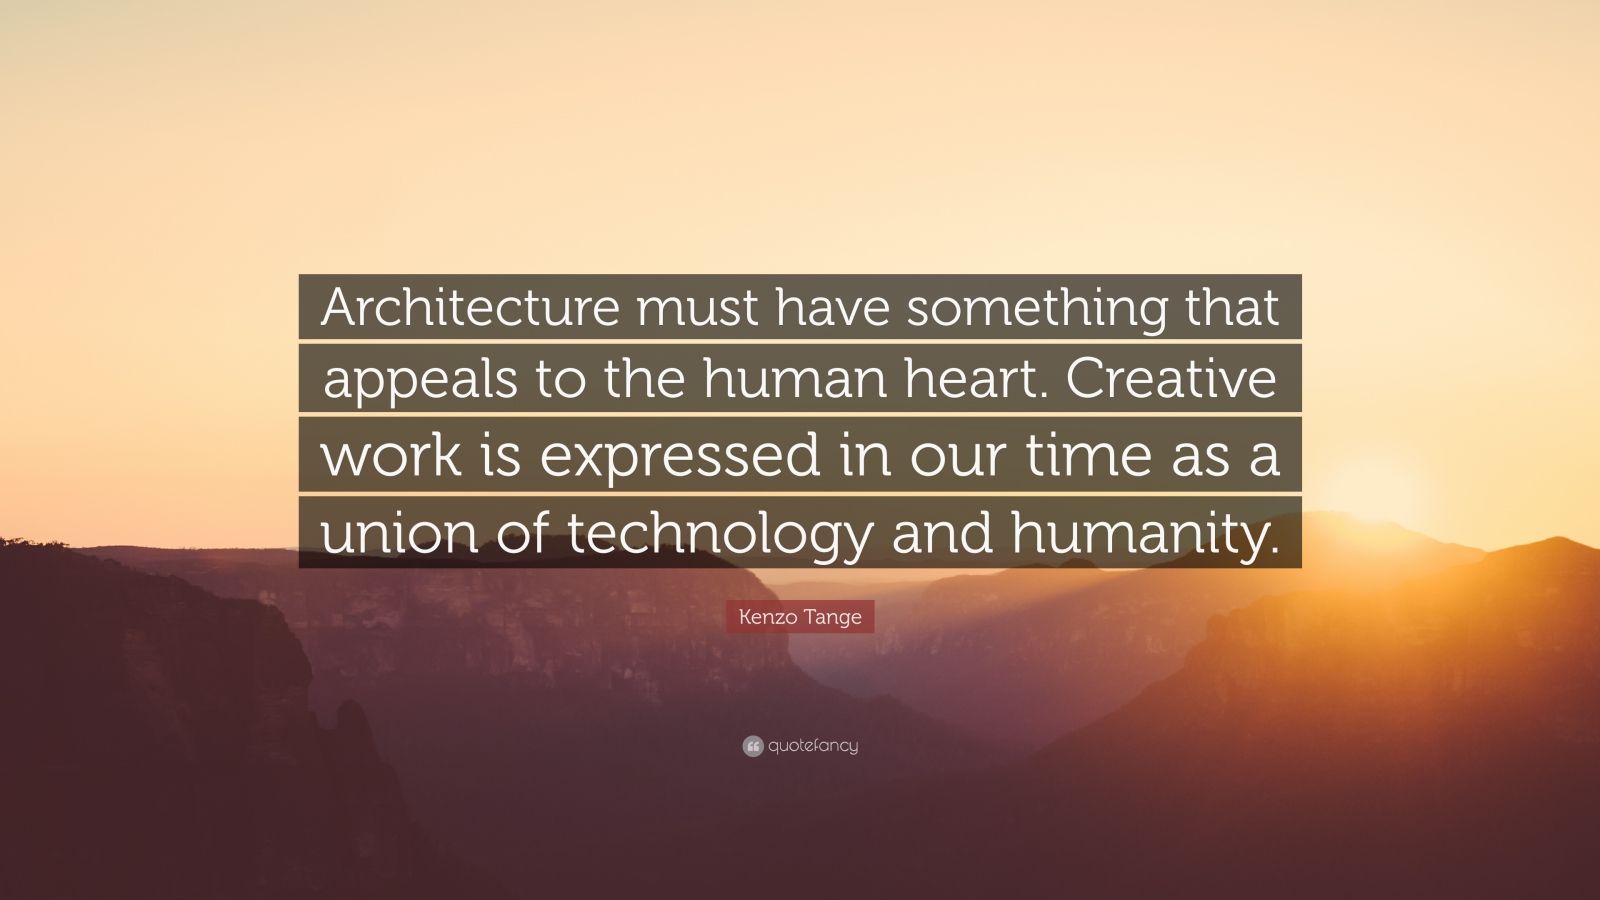 Kenzo Tange Quote: “Architecture must have something that appeals to ...